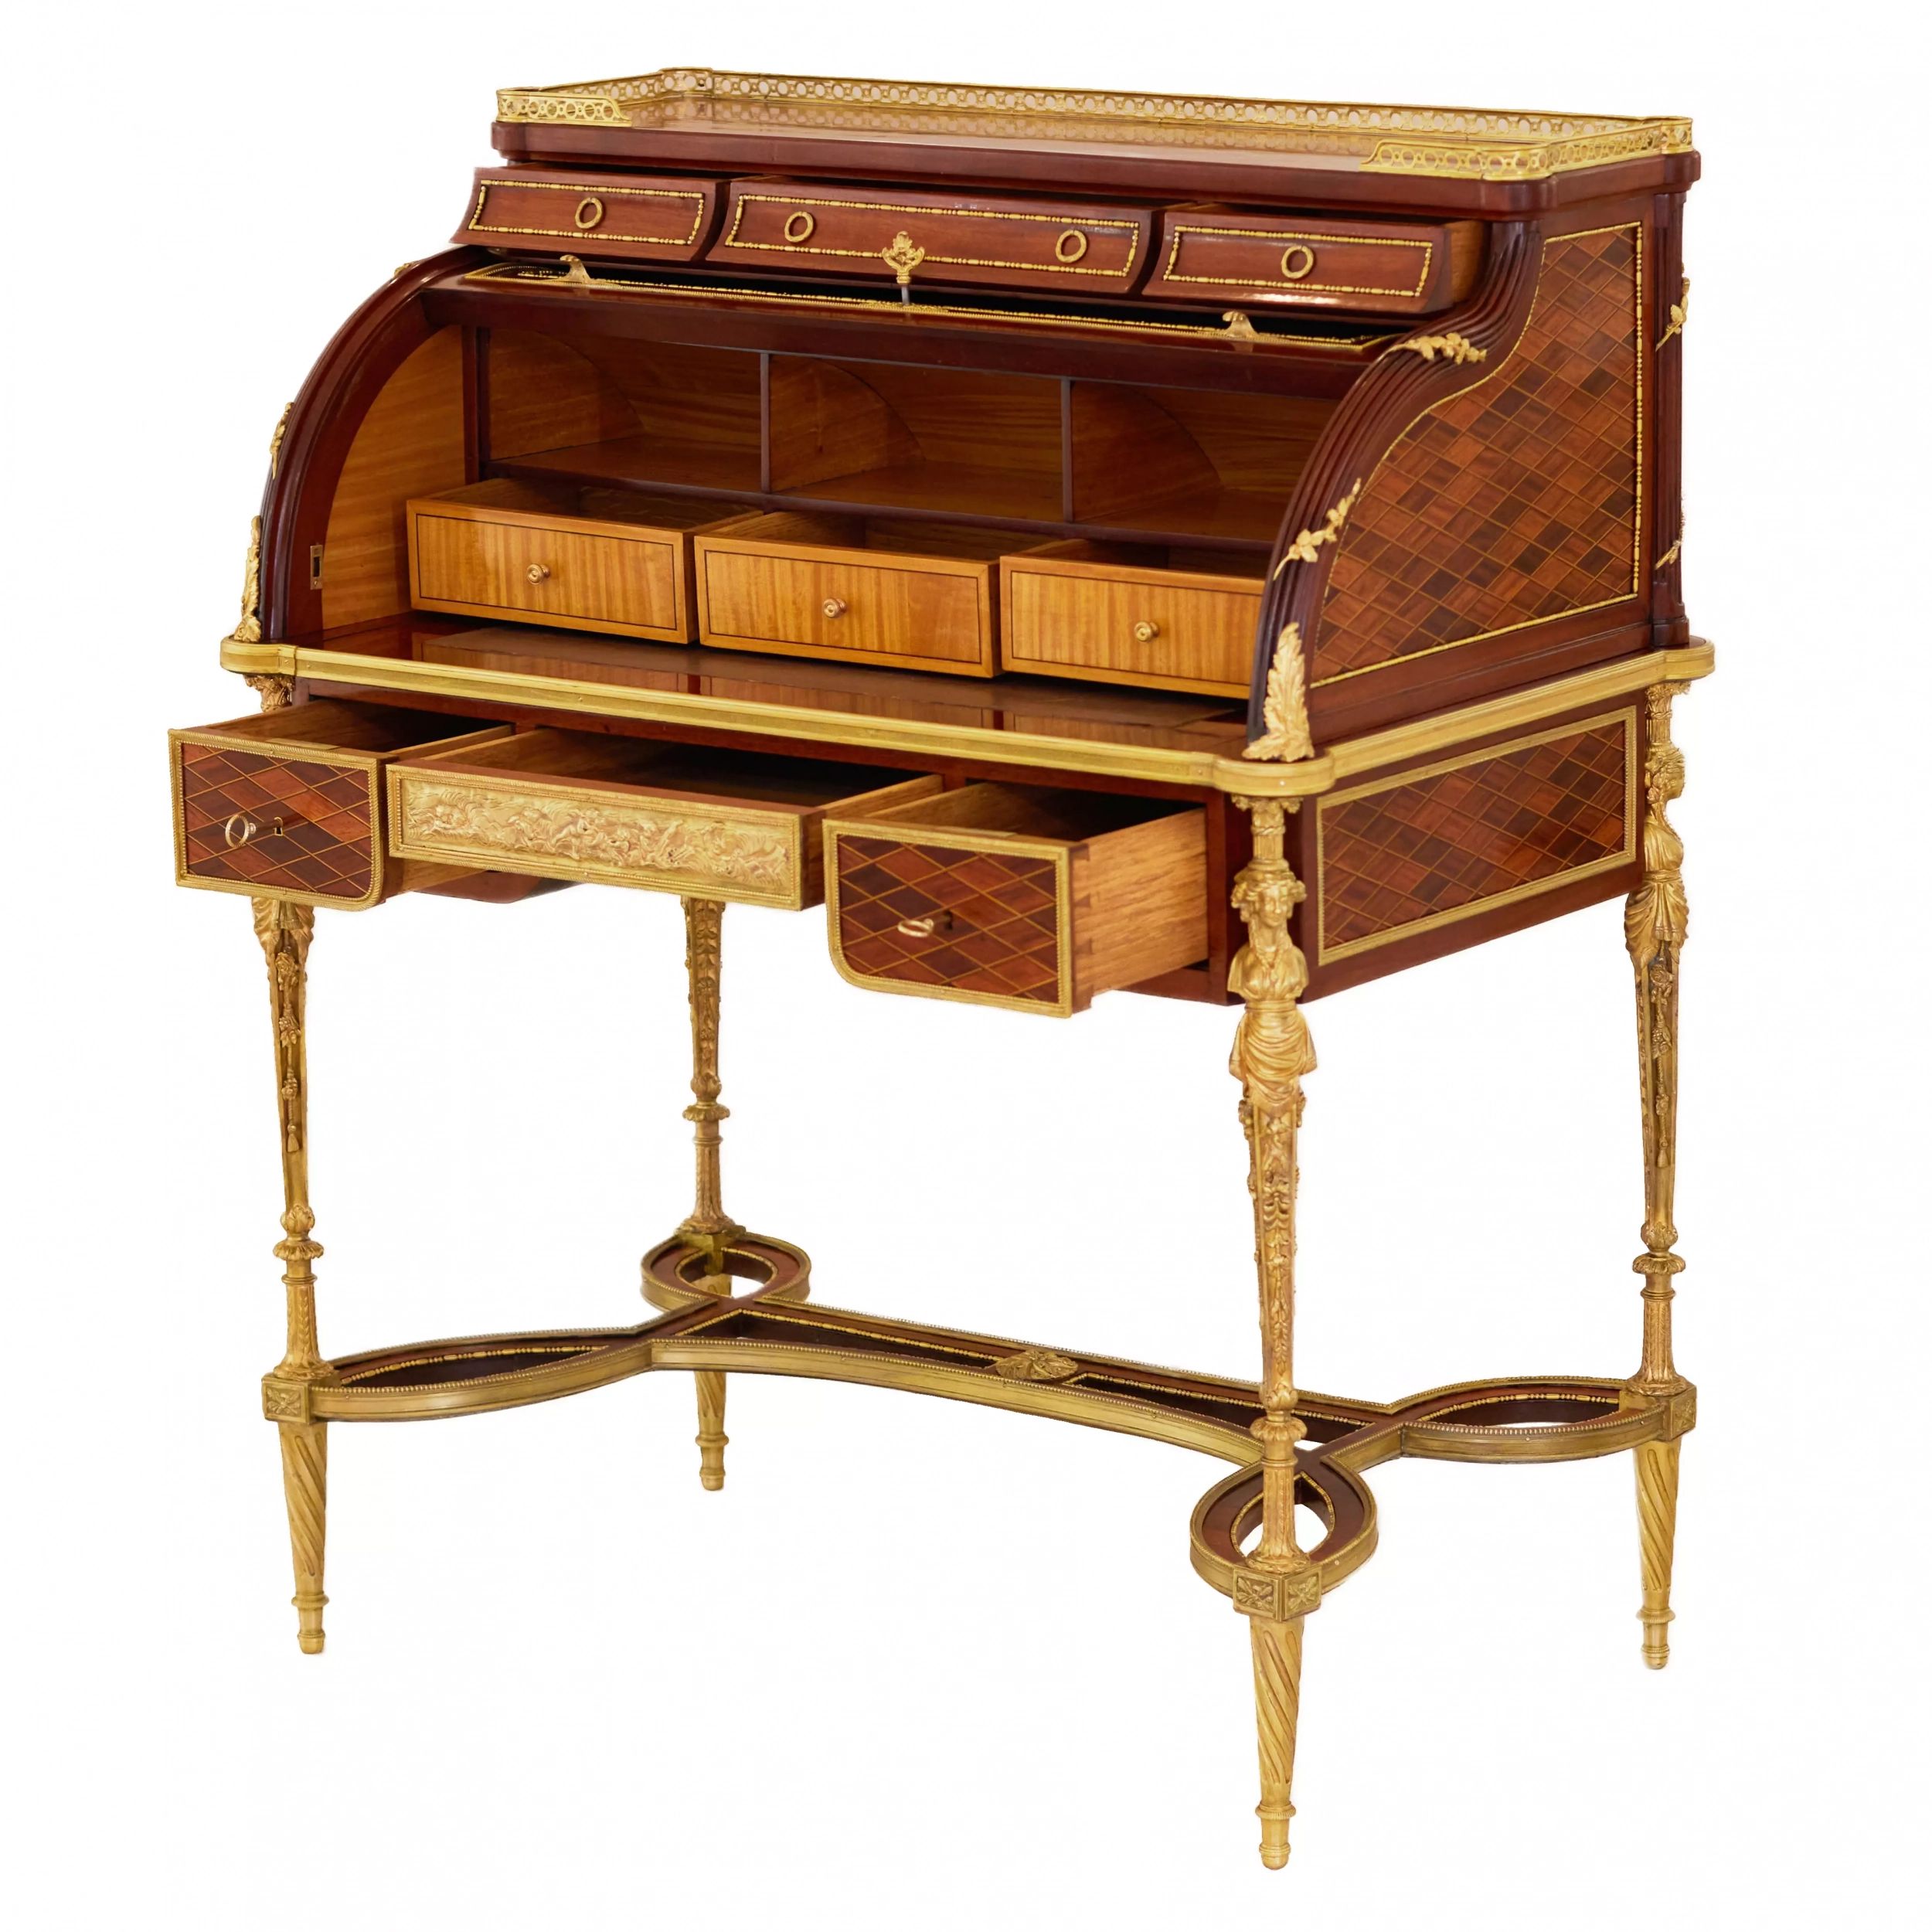 E.KAHN. A magnificent cylindrical bureau in mahogany and satin wood with gilt bronze. - Image 6 of 14